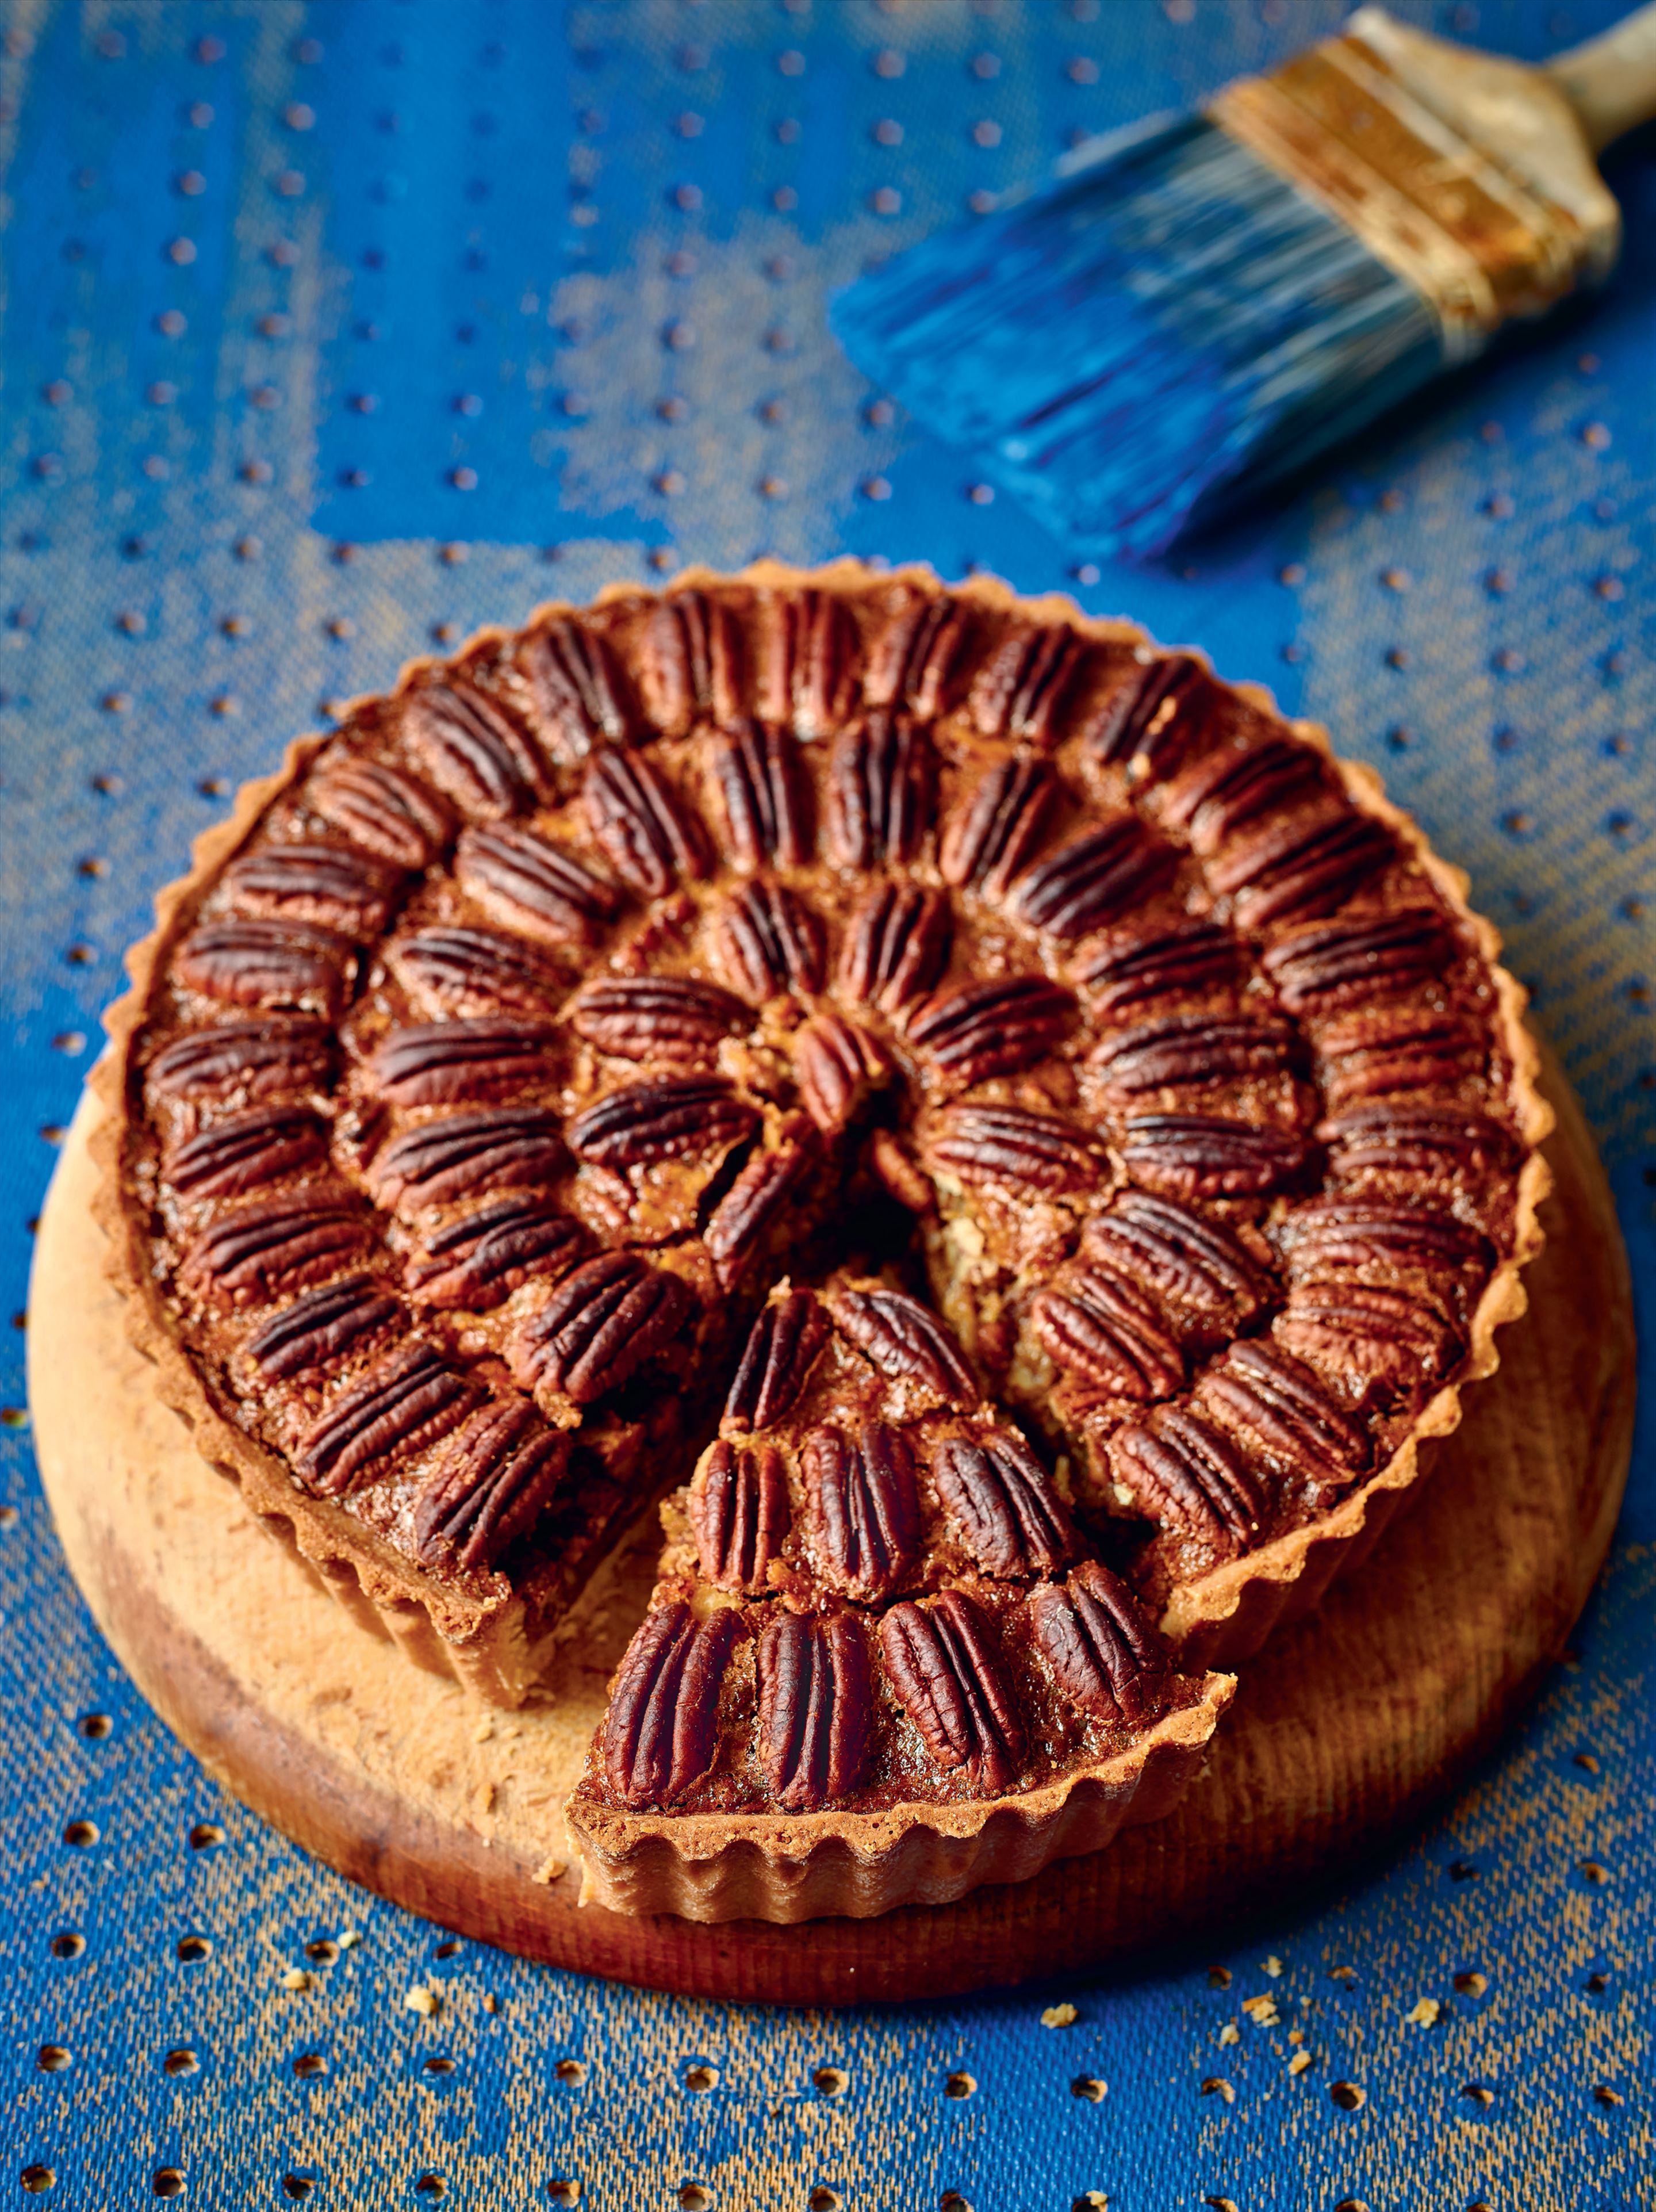 Pecan pie with spiced rum